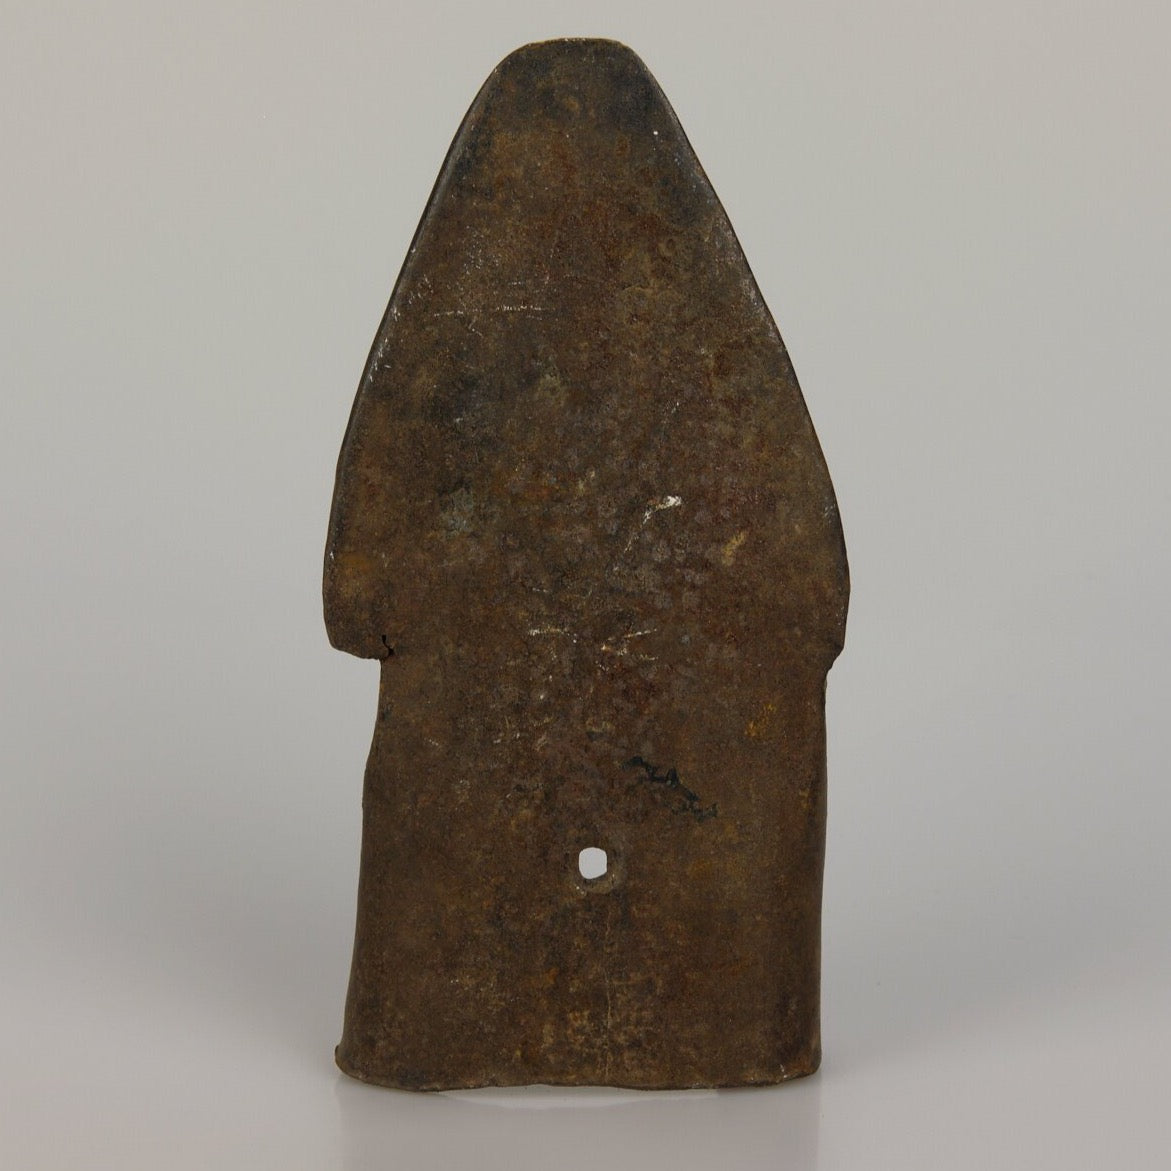 Metal Object from North Africa